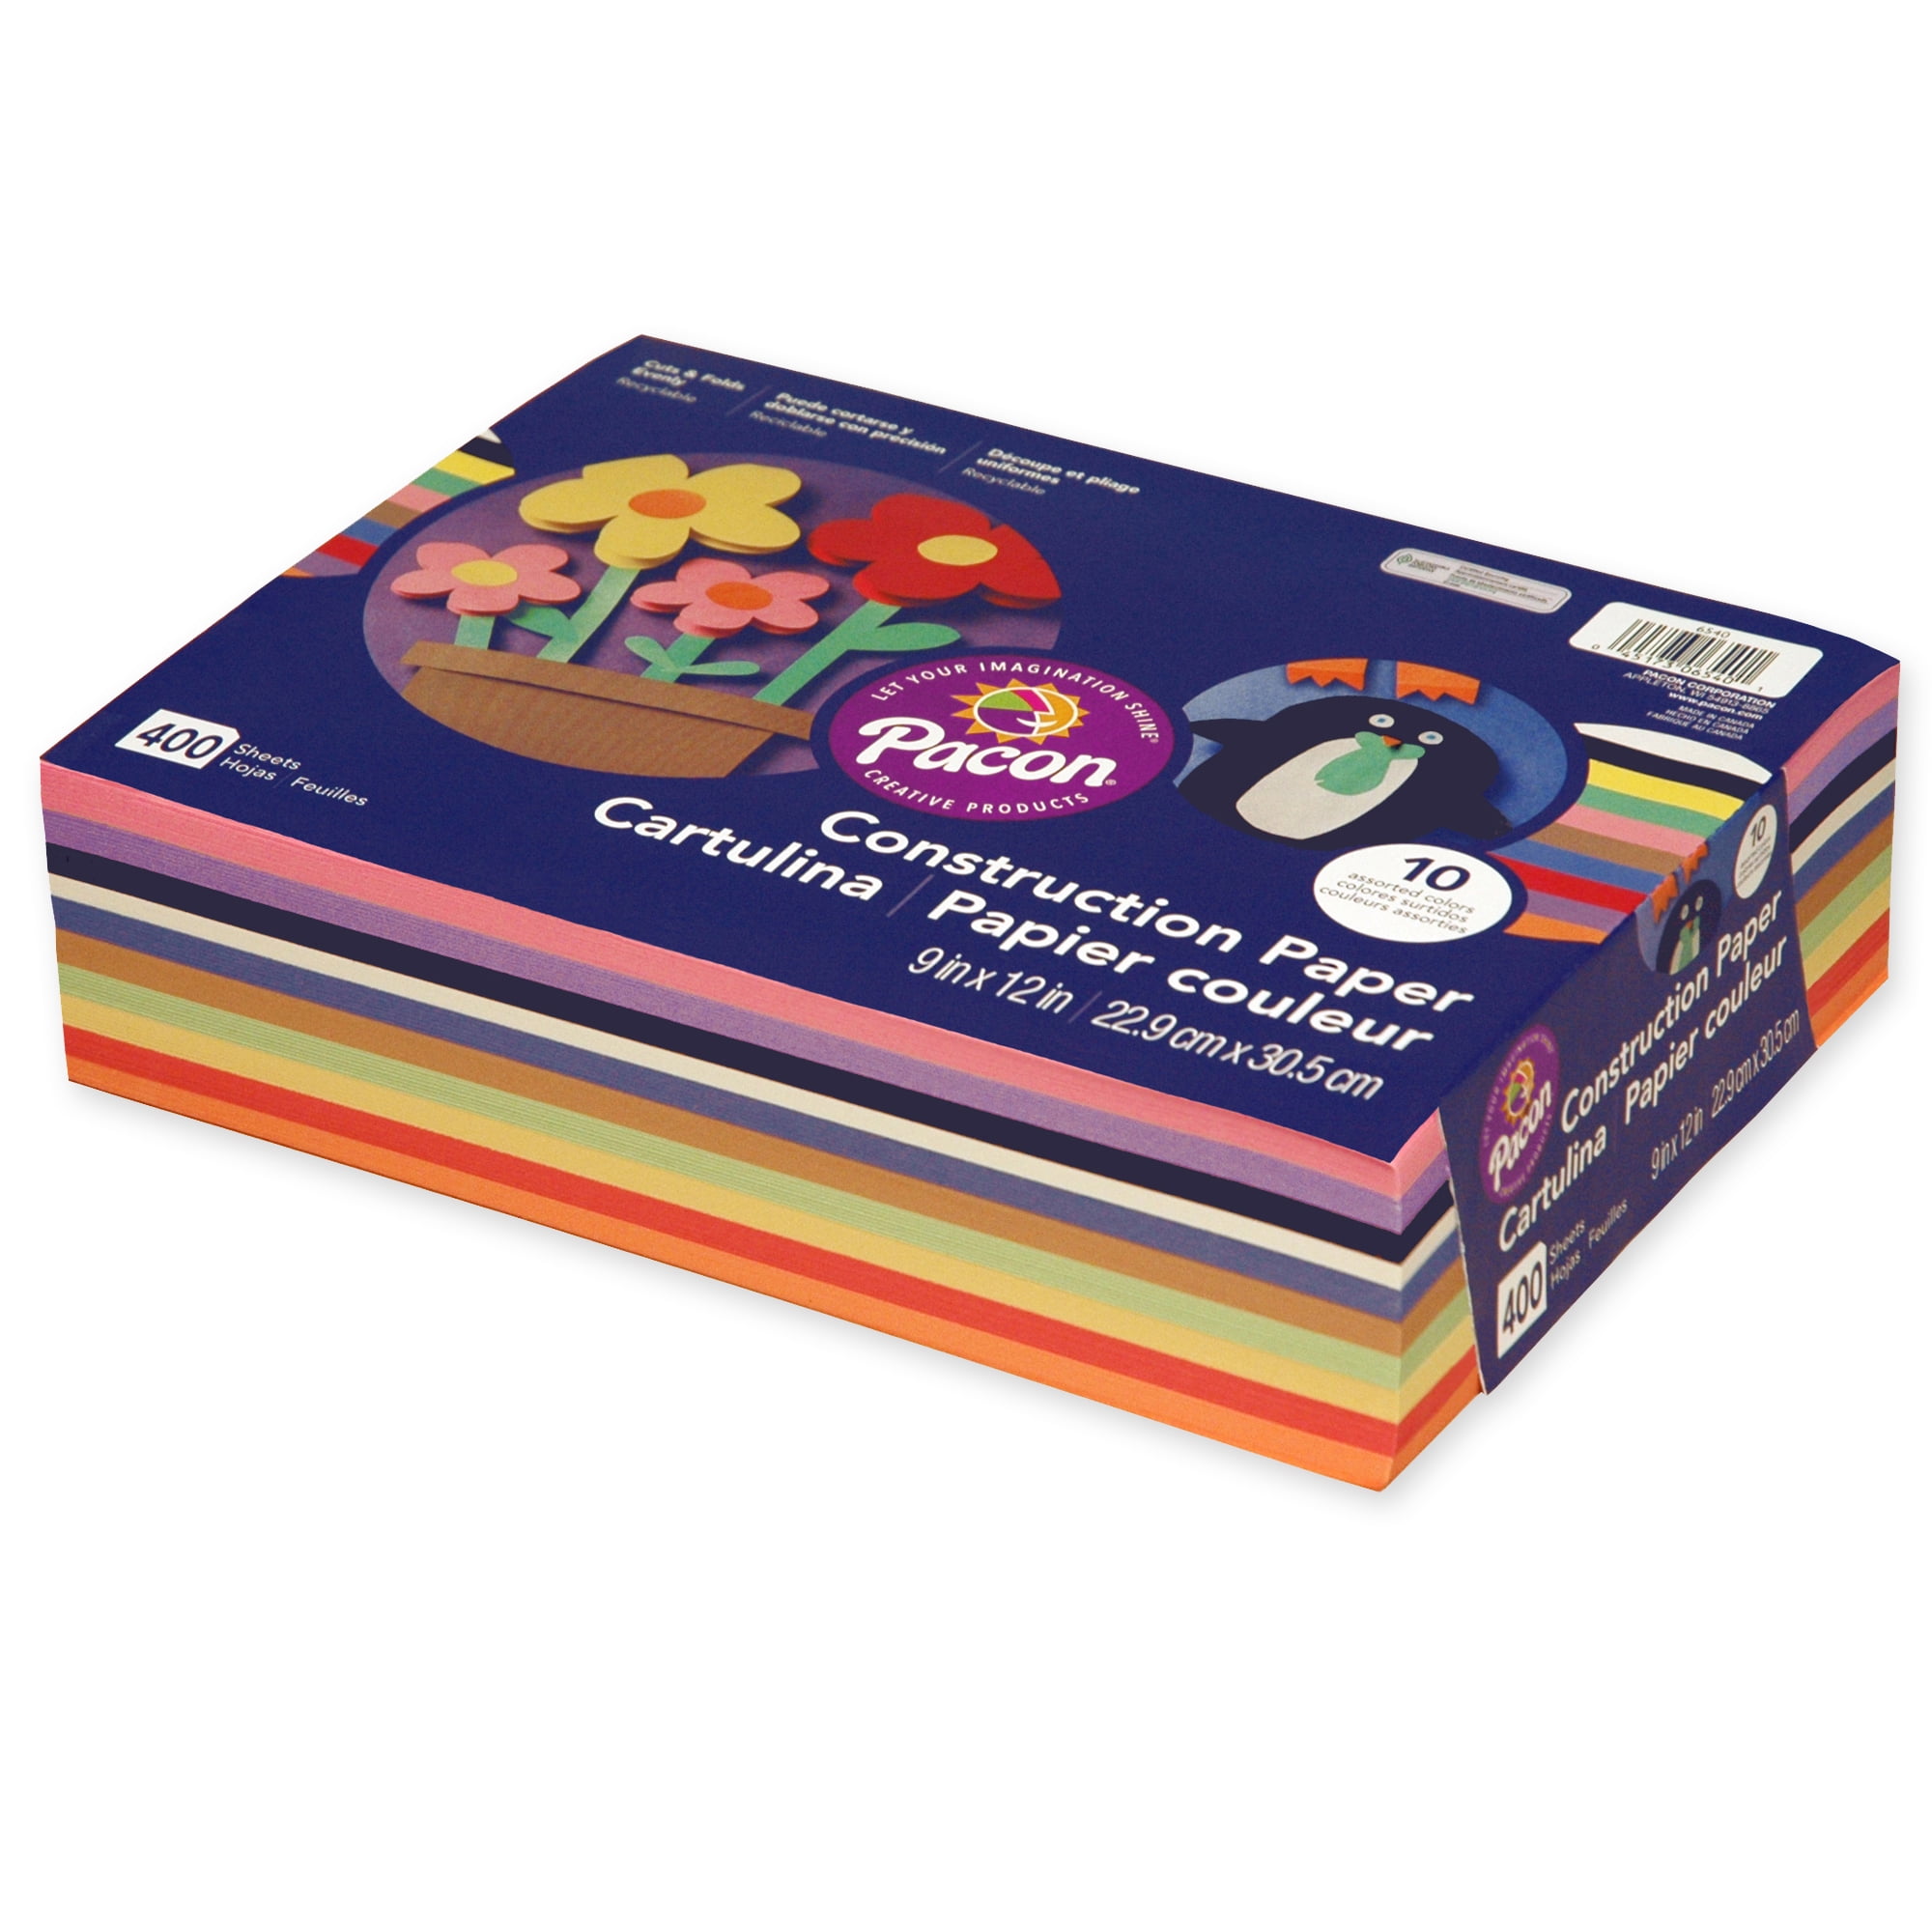 Pacon Construction Paper, 80 ct.